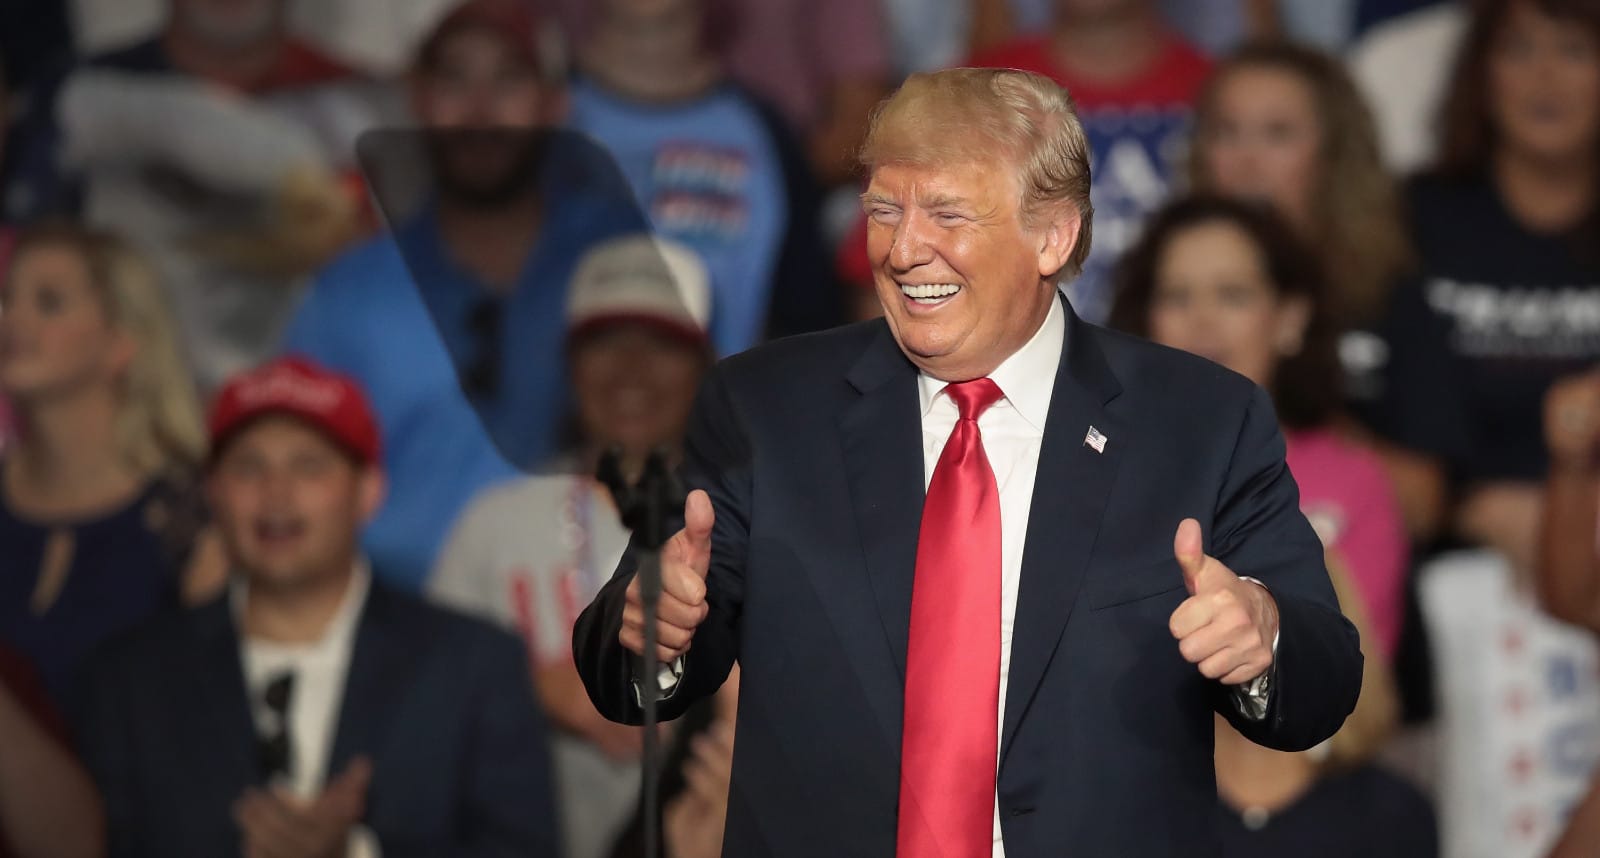 New Survey Shows Trump Blowing By Biden On Key Issues Heading Into 2024 – Trump News Today